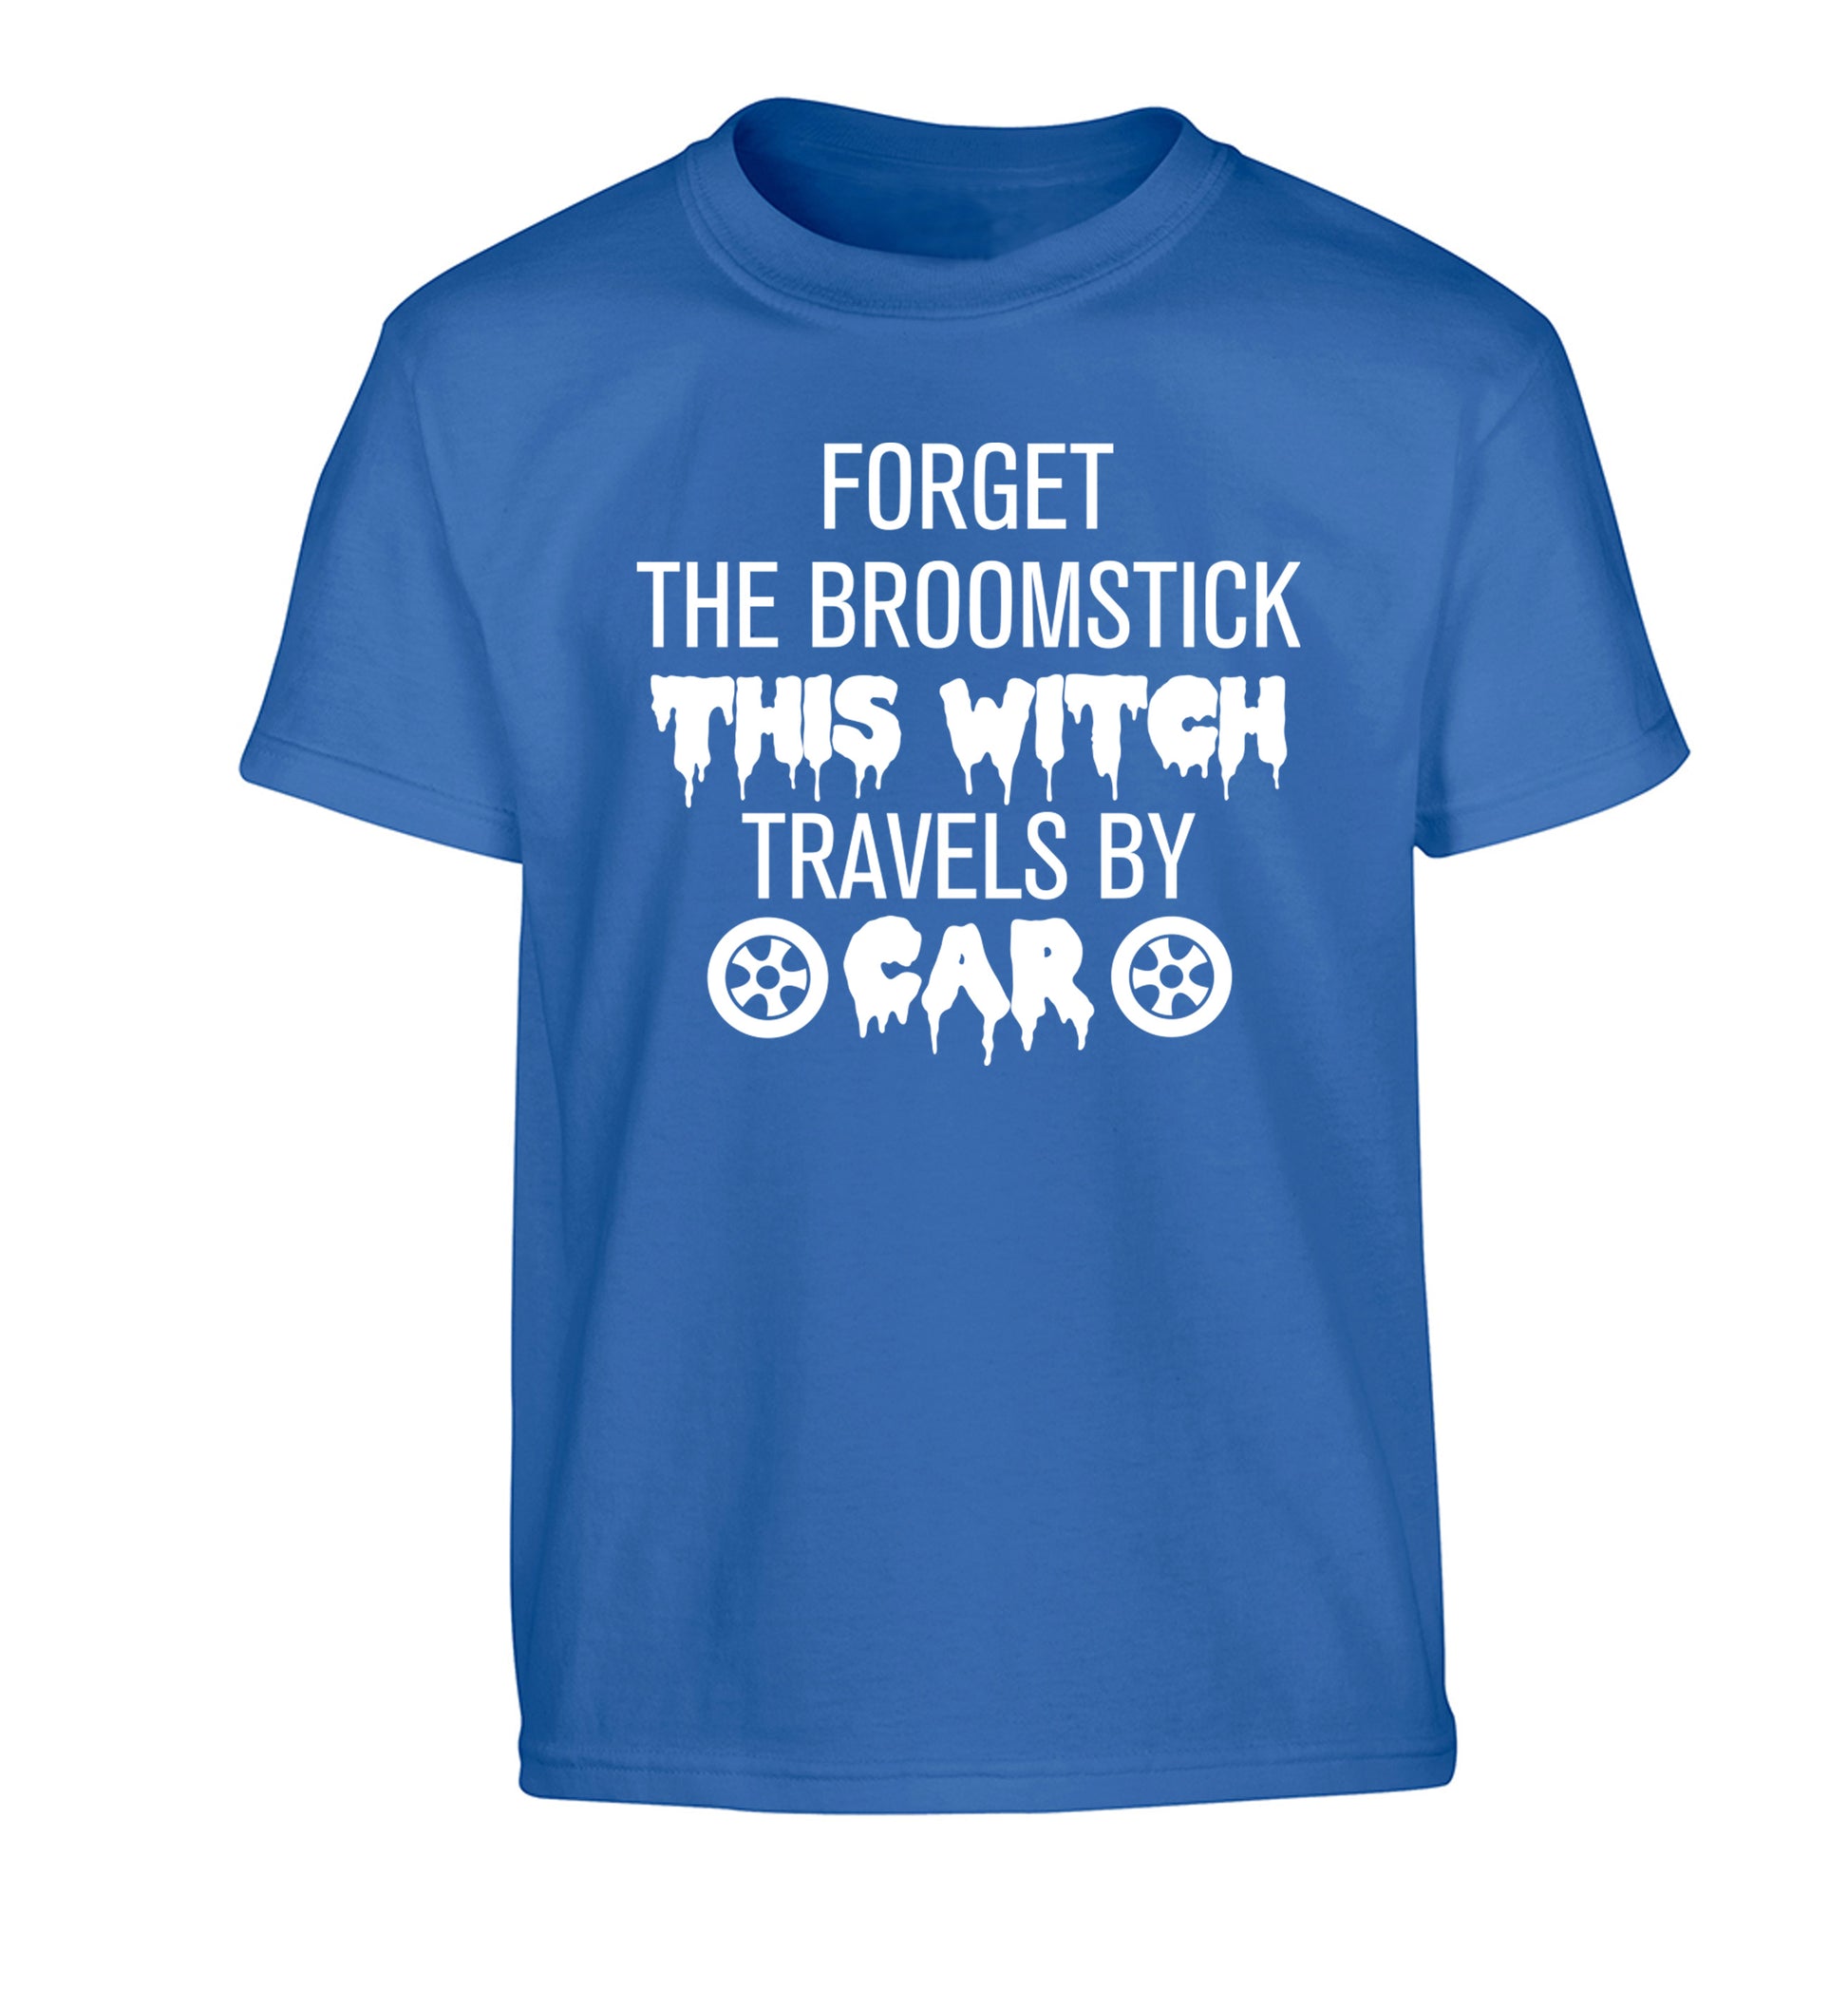 Forget the broomstick this witch travels by car Children's blue Tshirt 12-14 Years